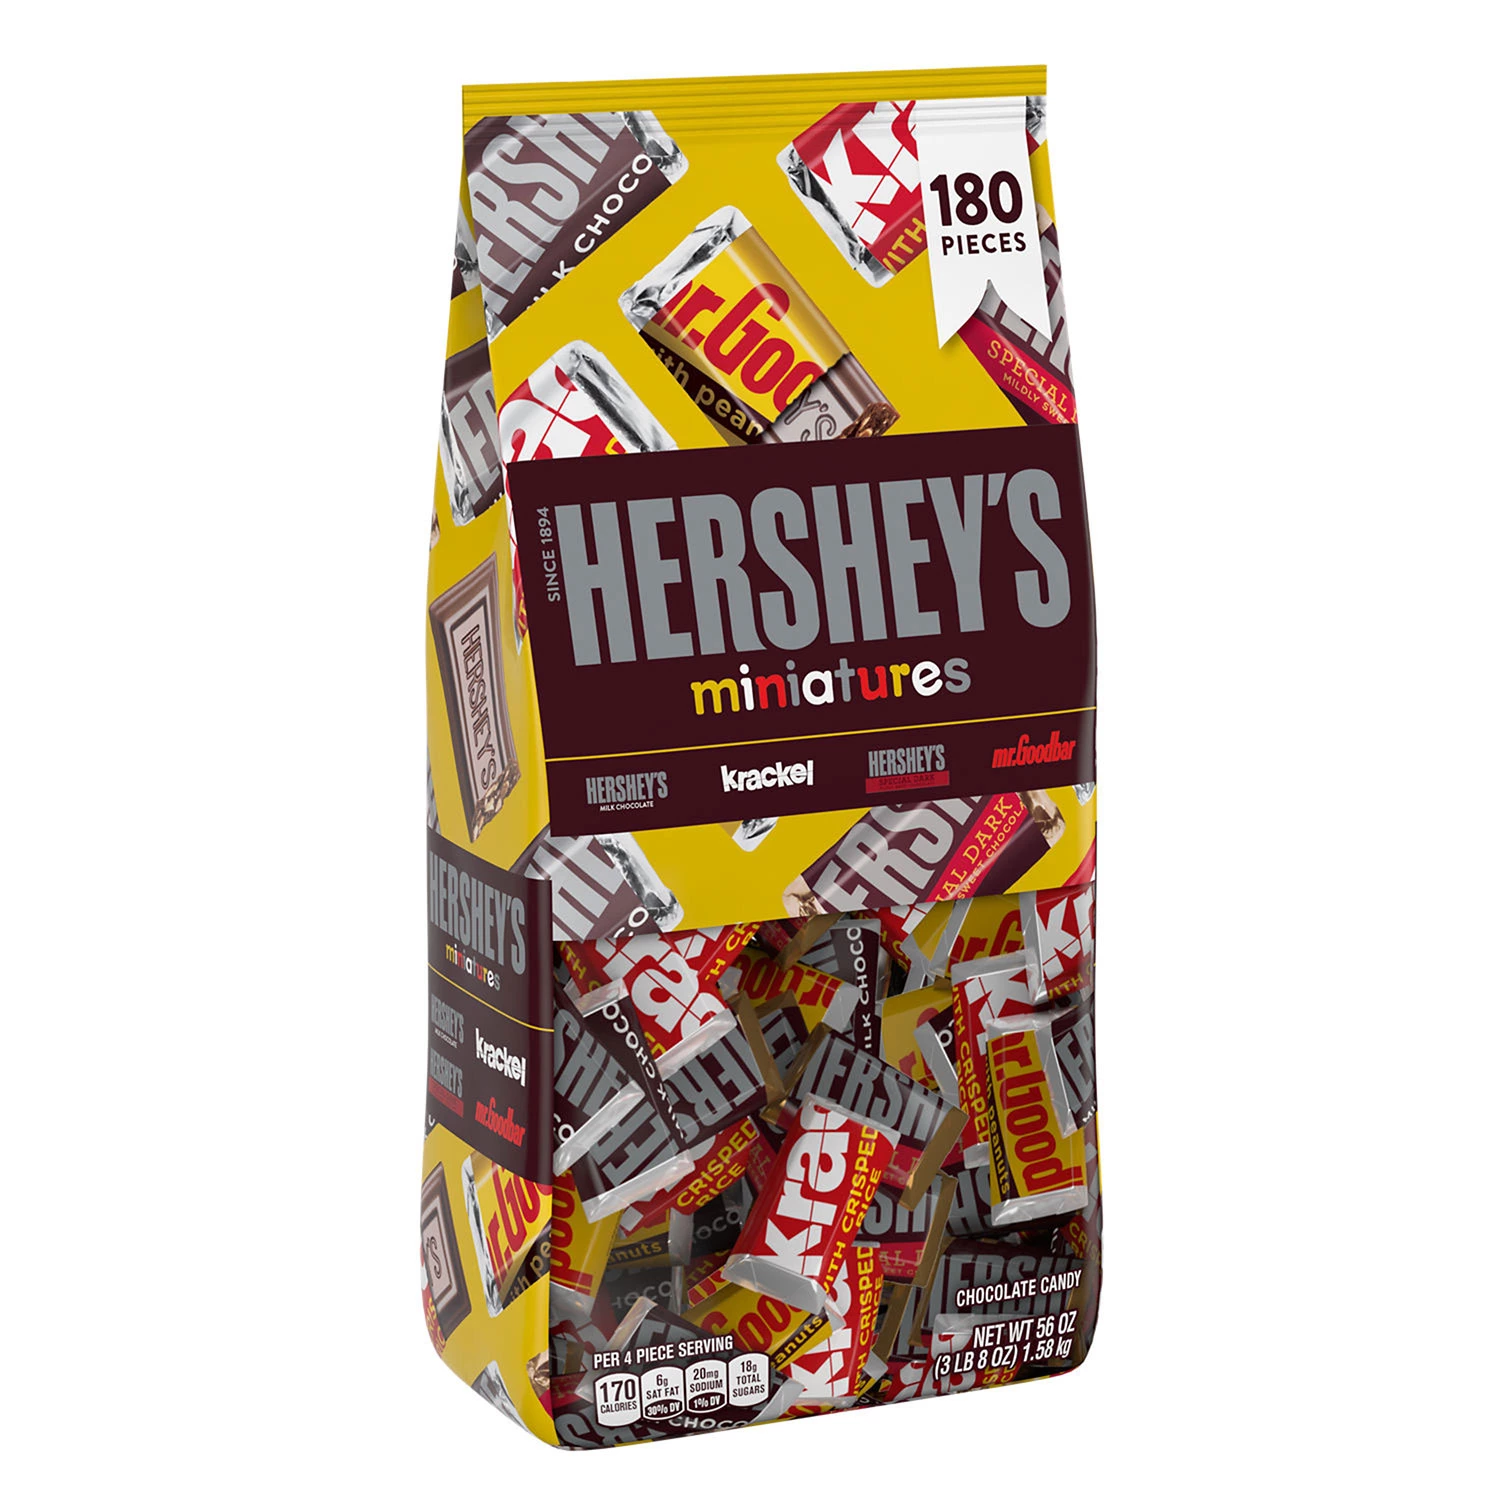 HERSHEY’S Miniatures Assorted Chocolate Candy, 180 pcs.